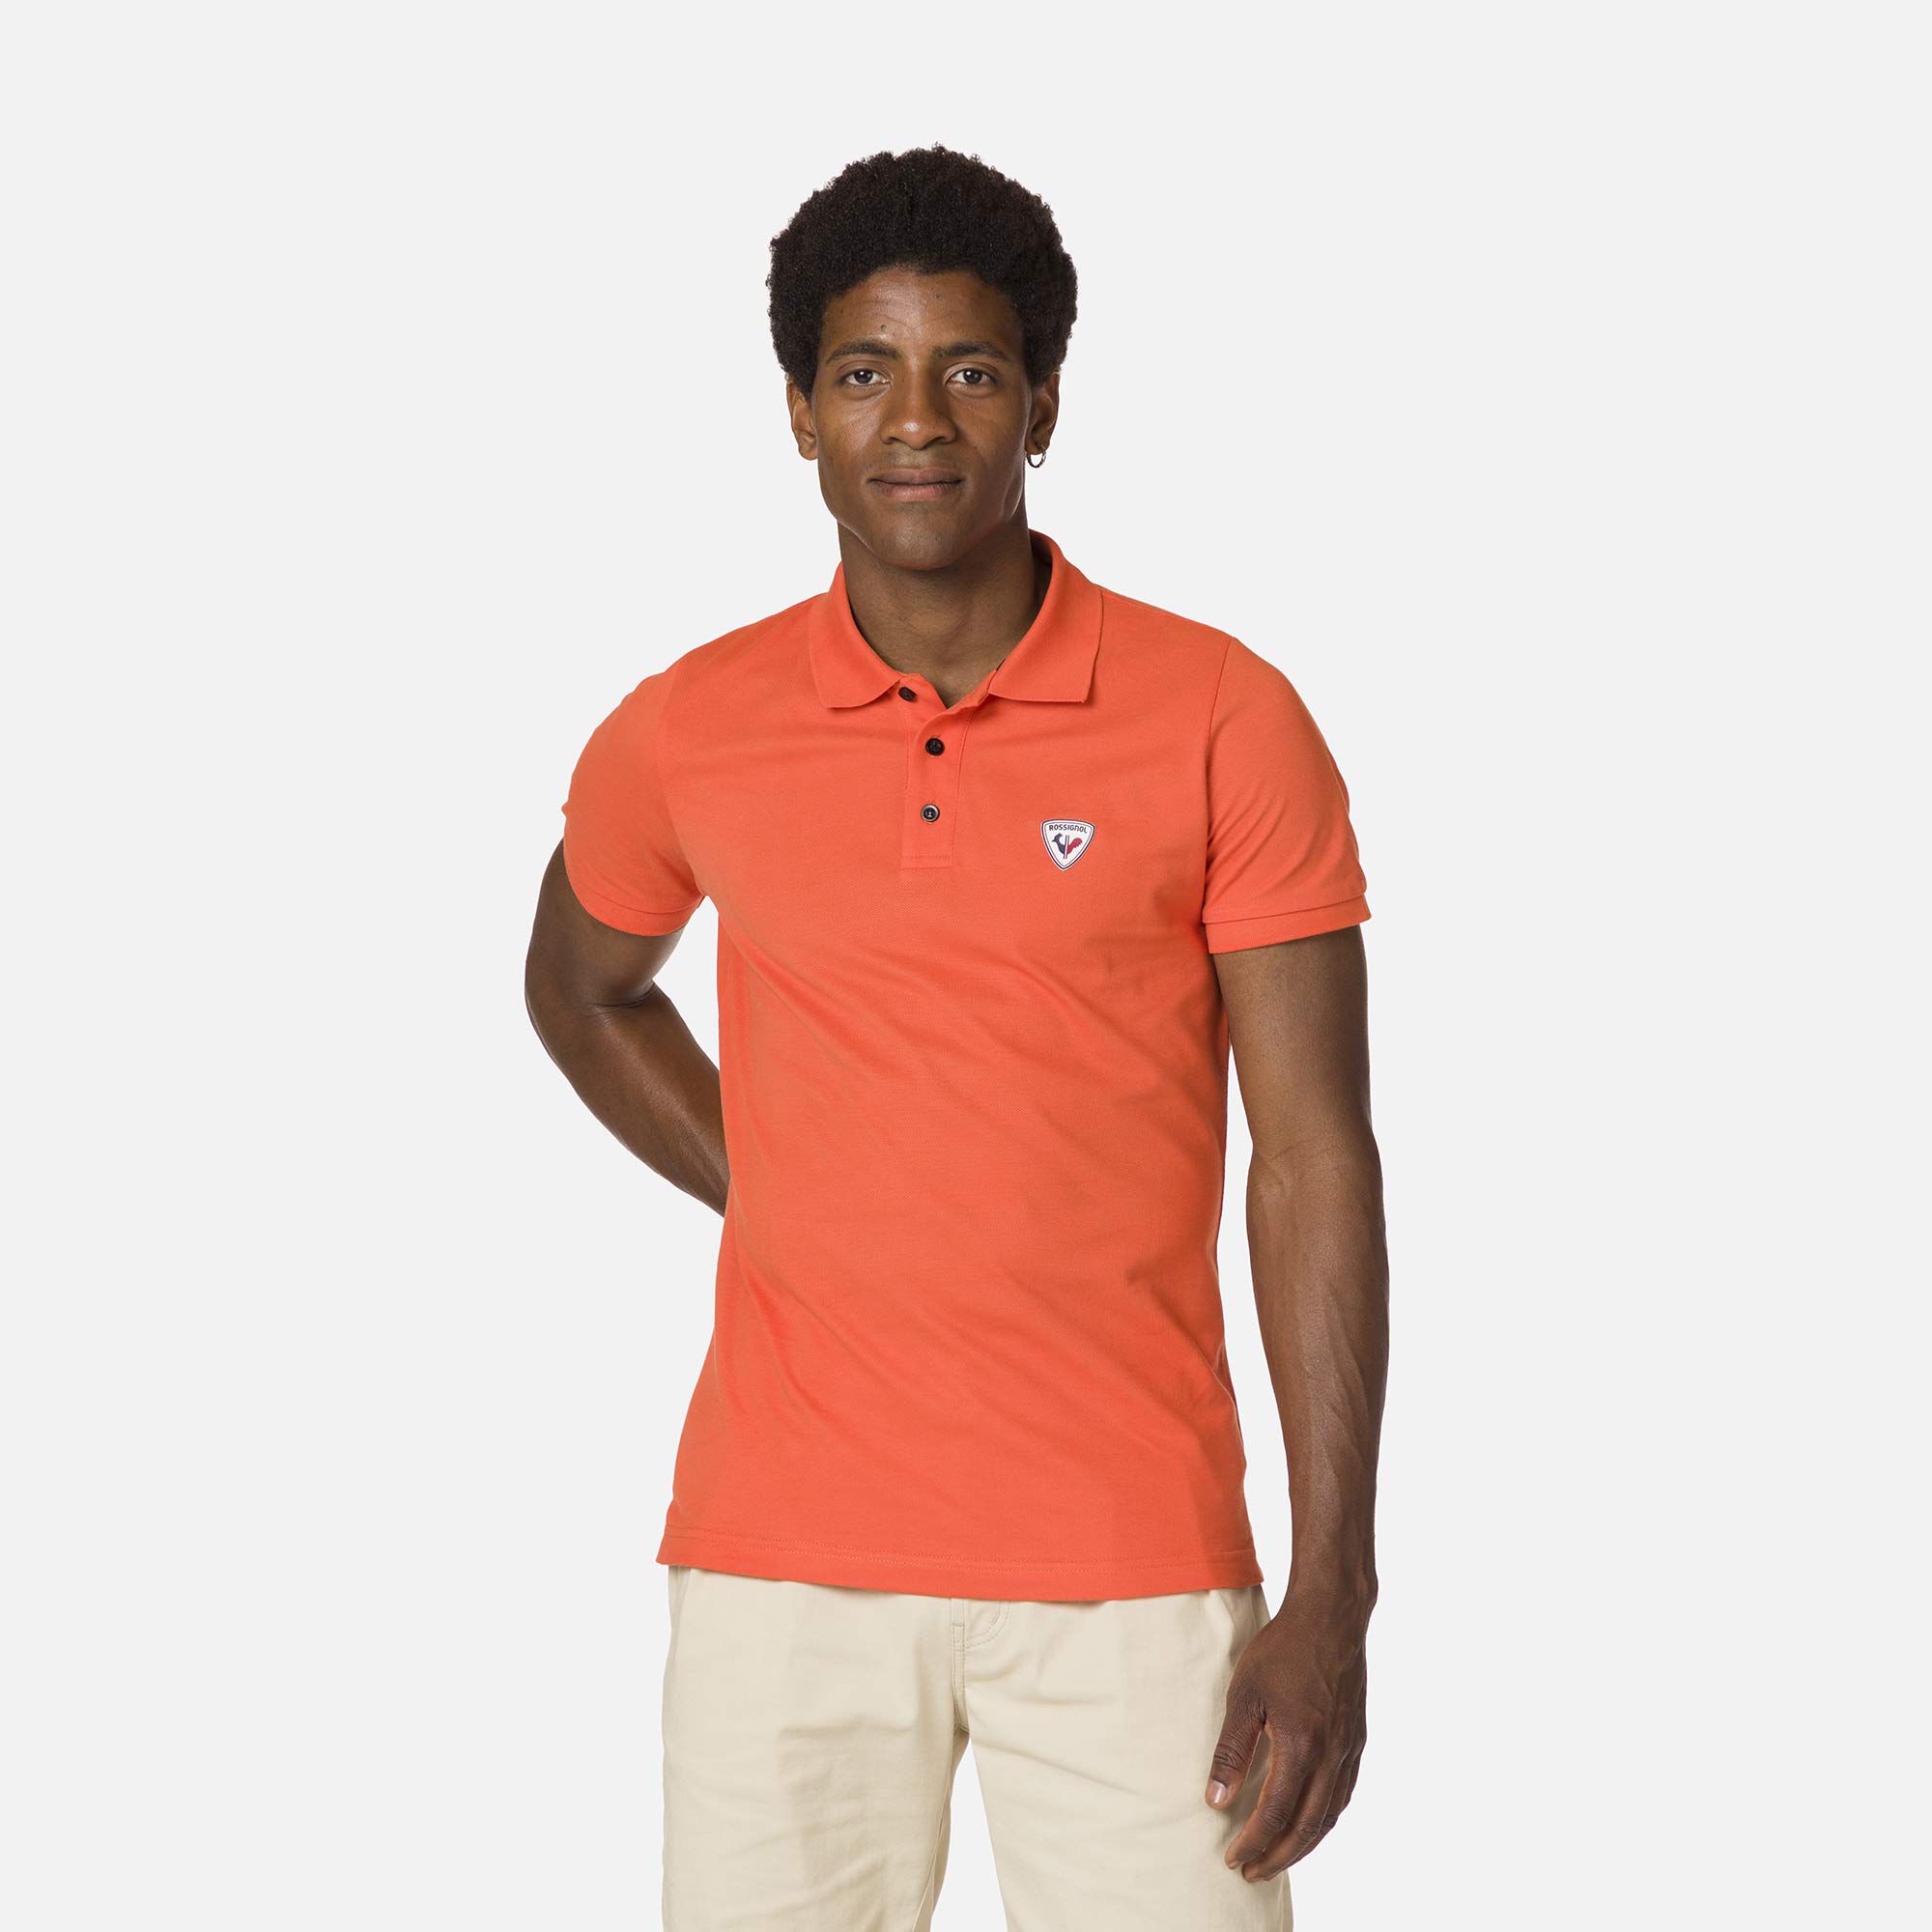 Rossignol logo-patch polo shirt - Red